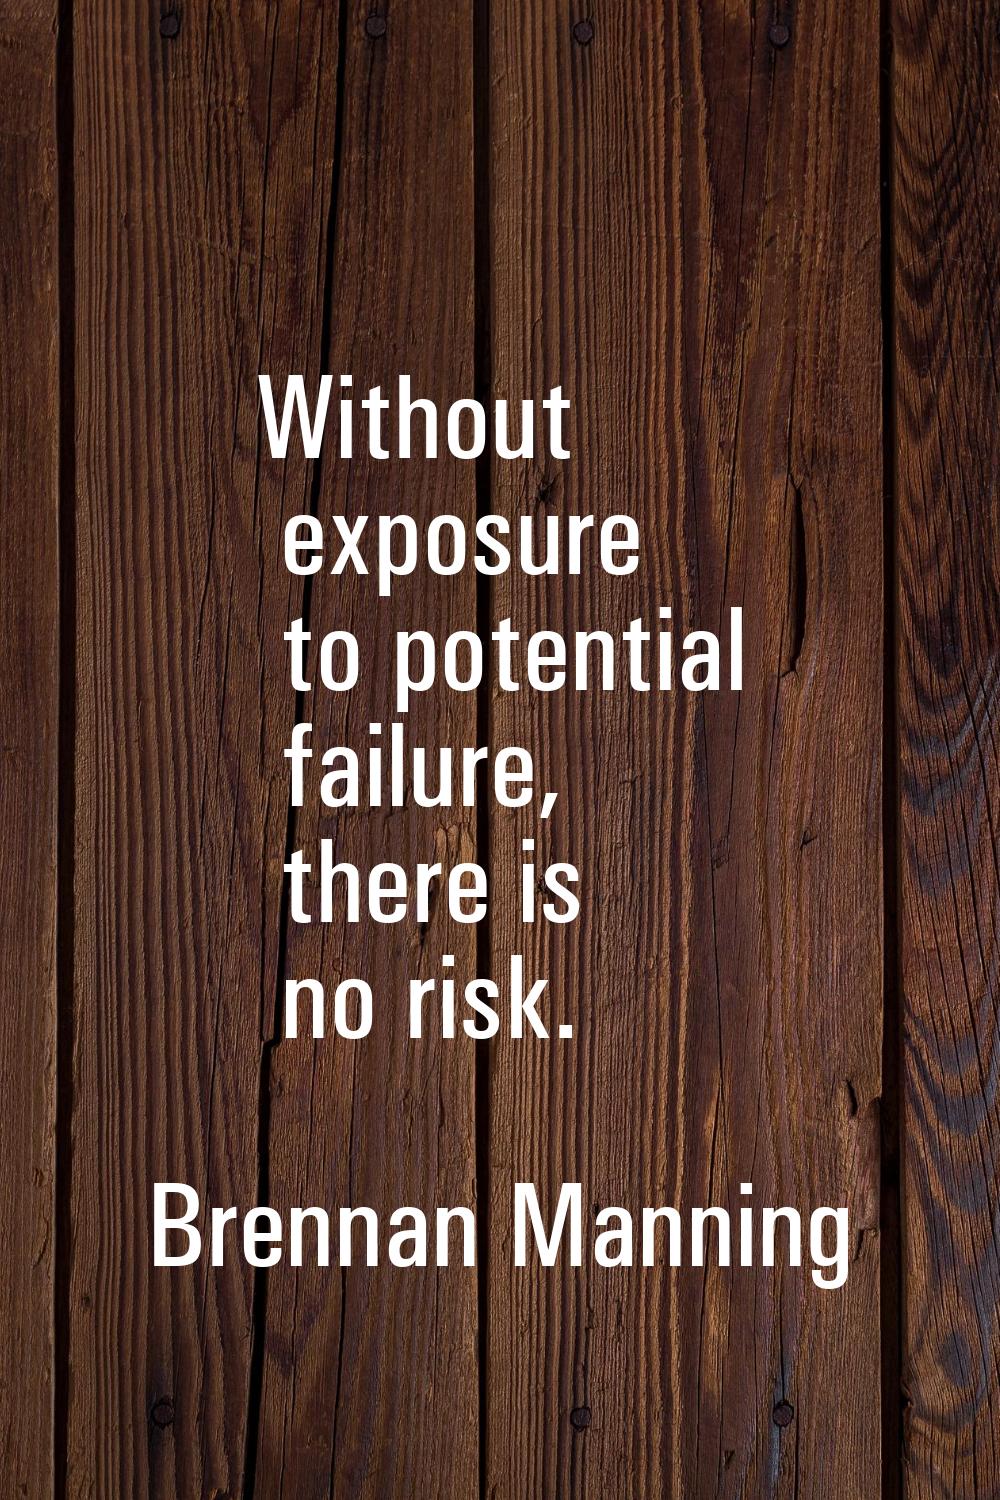 Without exposure to potential failure, there is no risk.